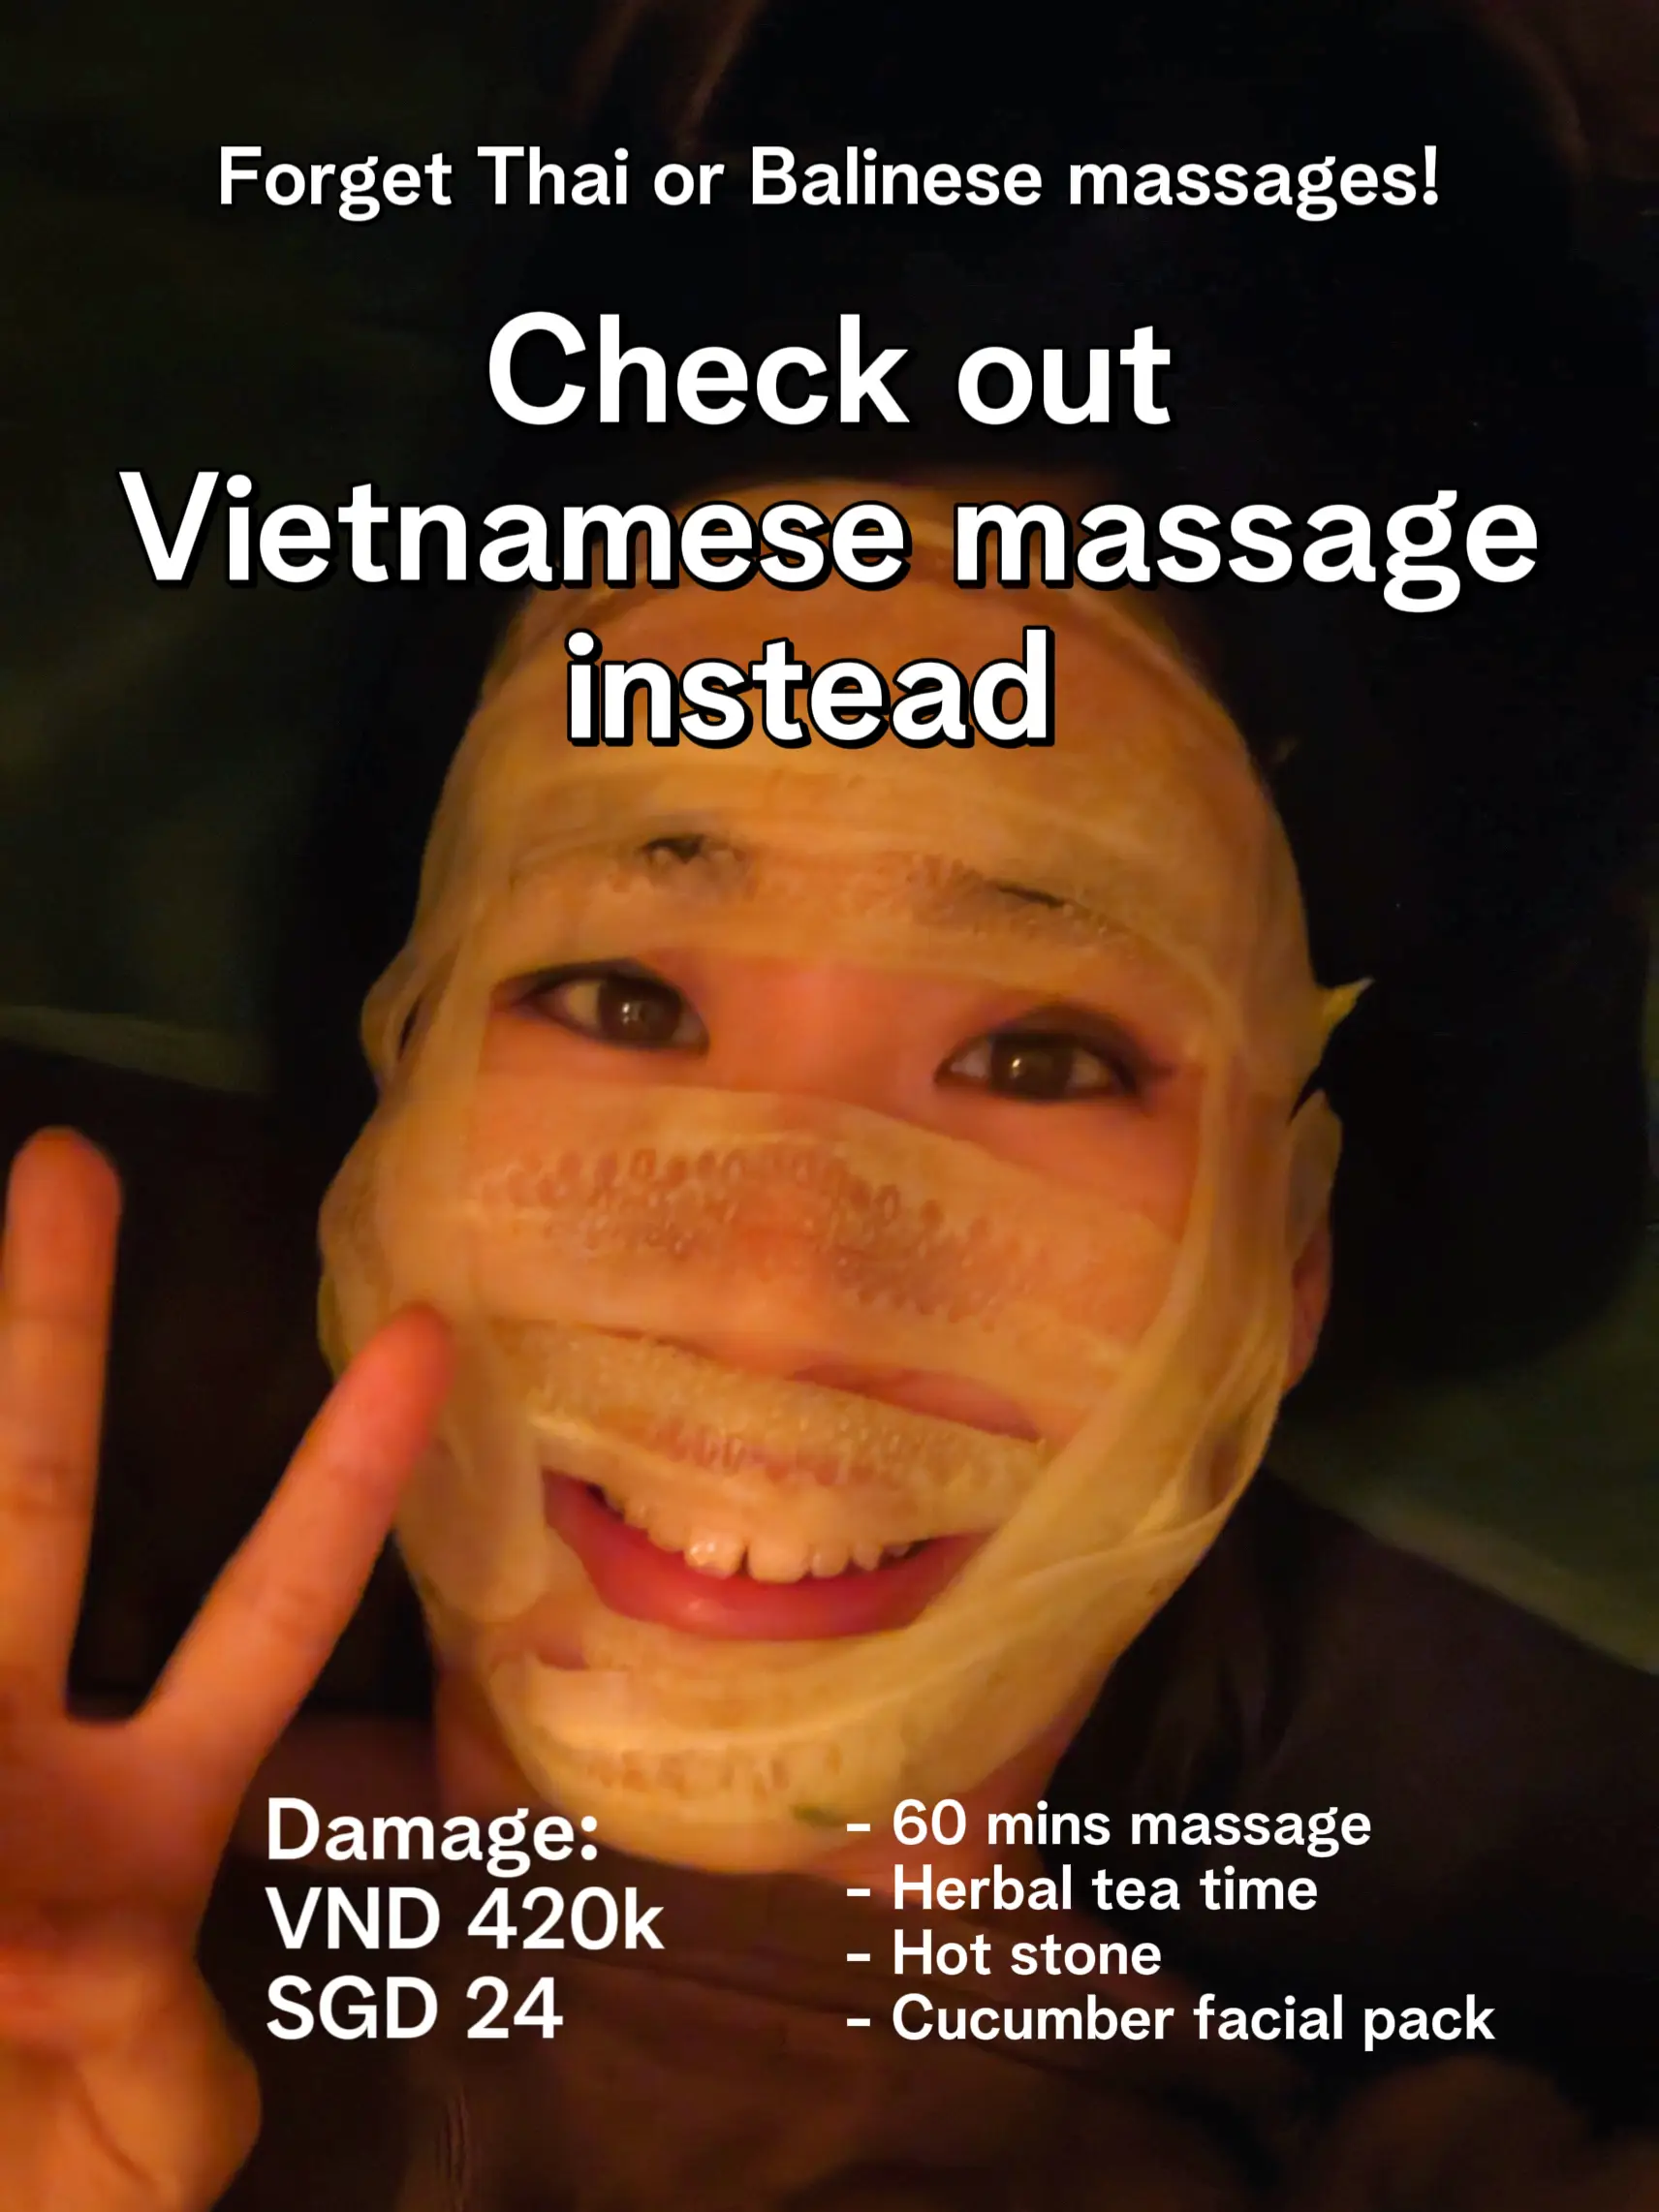 Most amazing Vietnamese massage we tried in 🇻🇳's images(0)